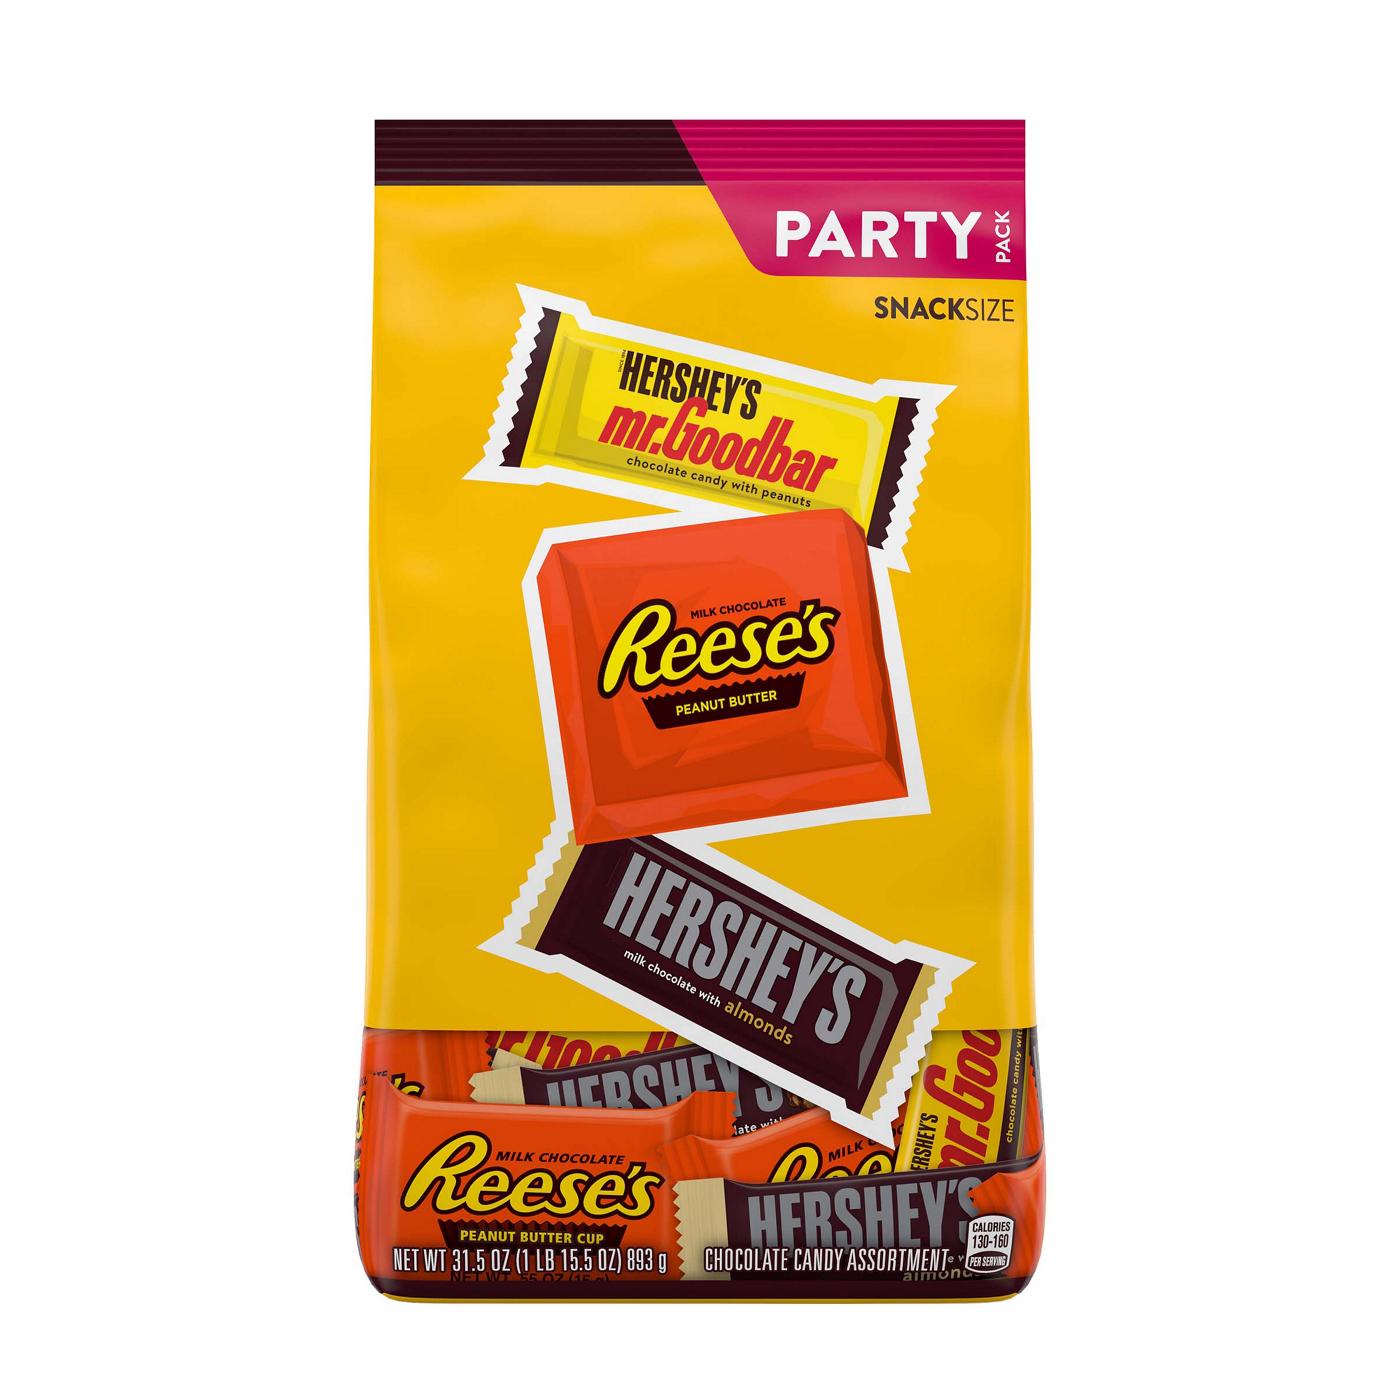 Hershey's & Reese's Assorted Chocolate Snack Size Candy - Party Pack; image 1 of 3